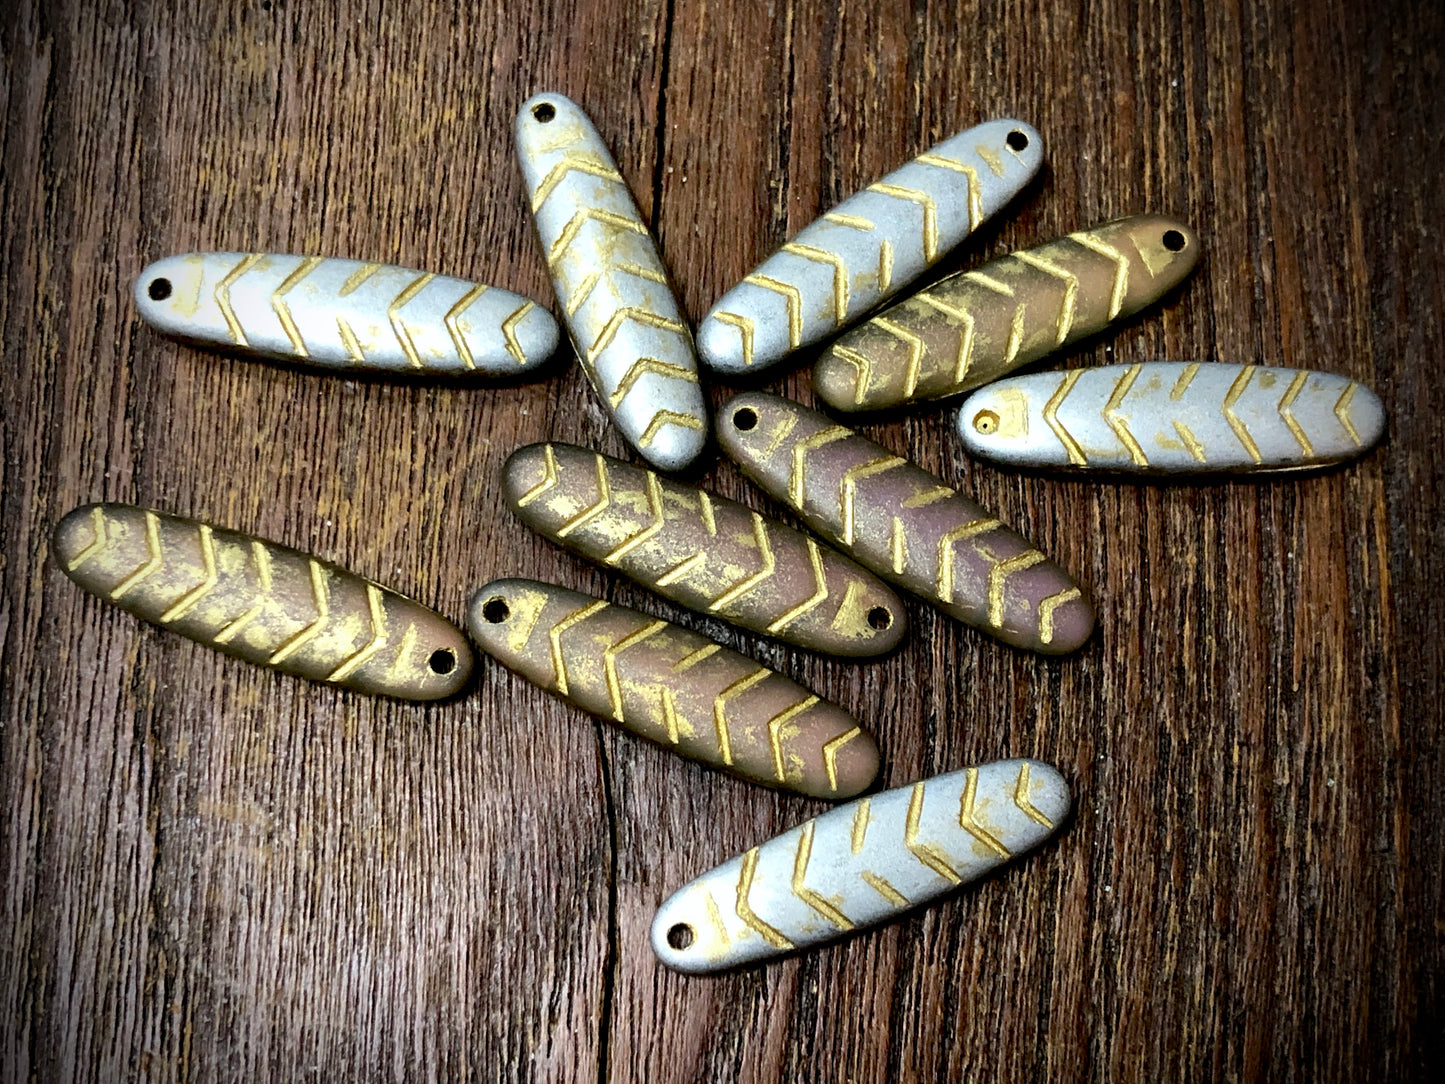 Frosted Honey Back Glow with Metallic Gold Wash Glass Chevron Dagger Czech Glass Beads